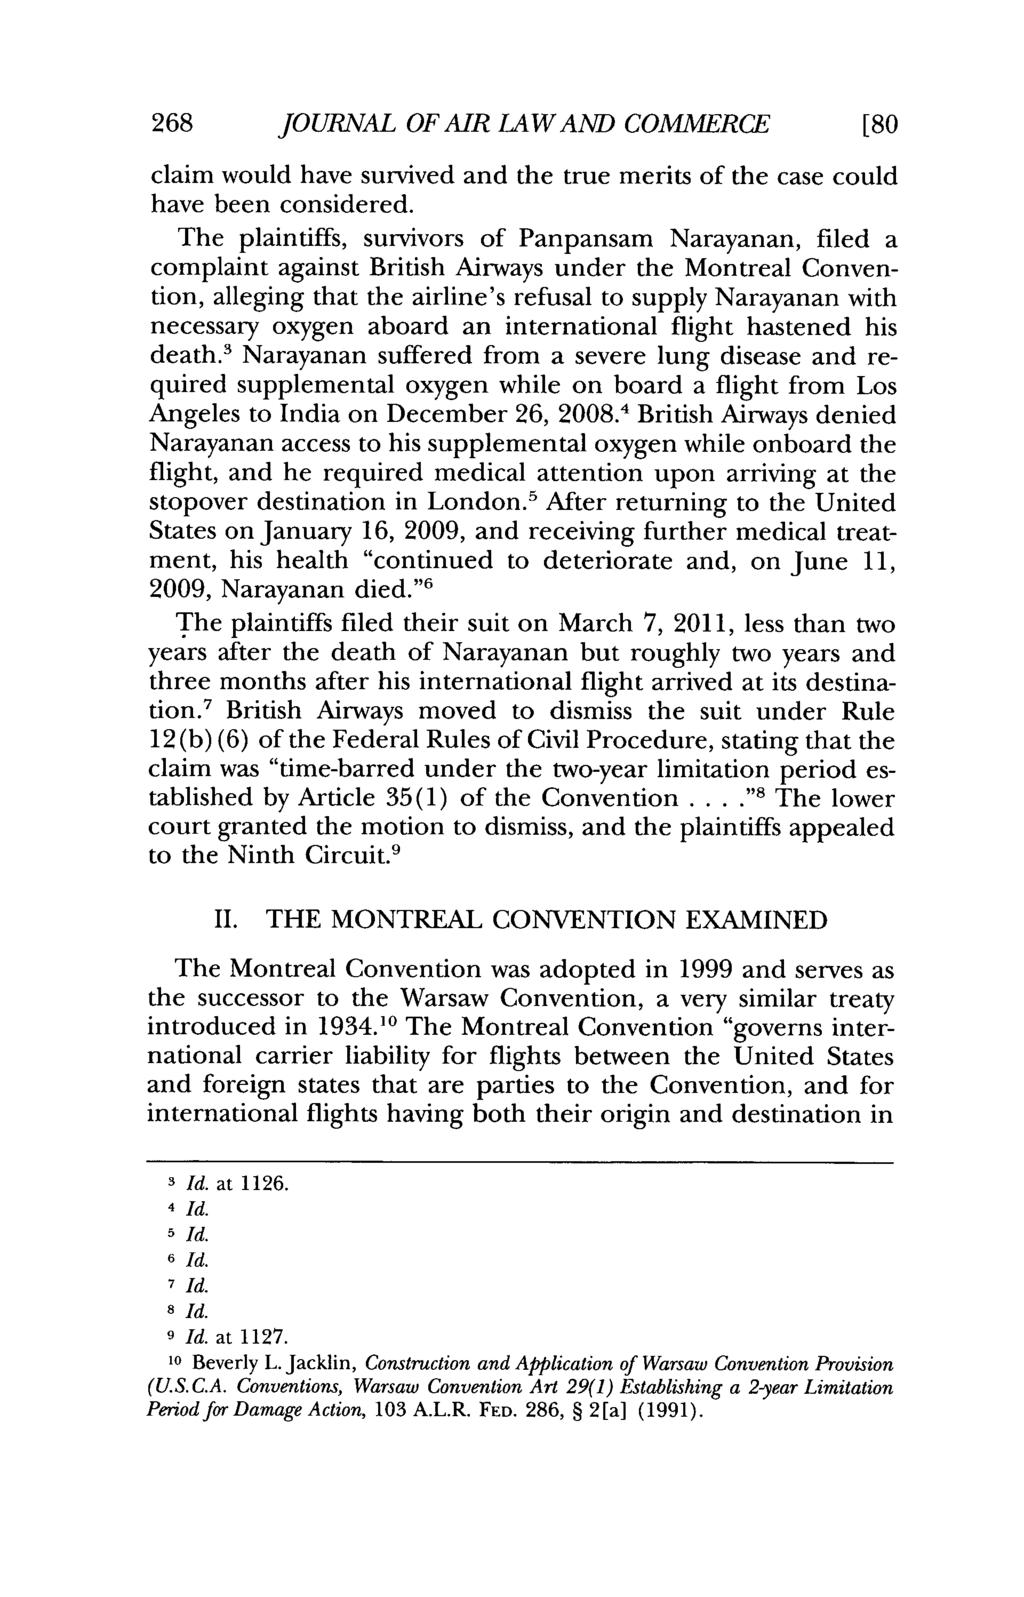 268 JOURNAL OF AIR LAW AN COMMERCE claim would have survived and the true merits of the case could have been considered.